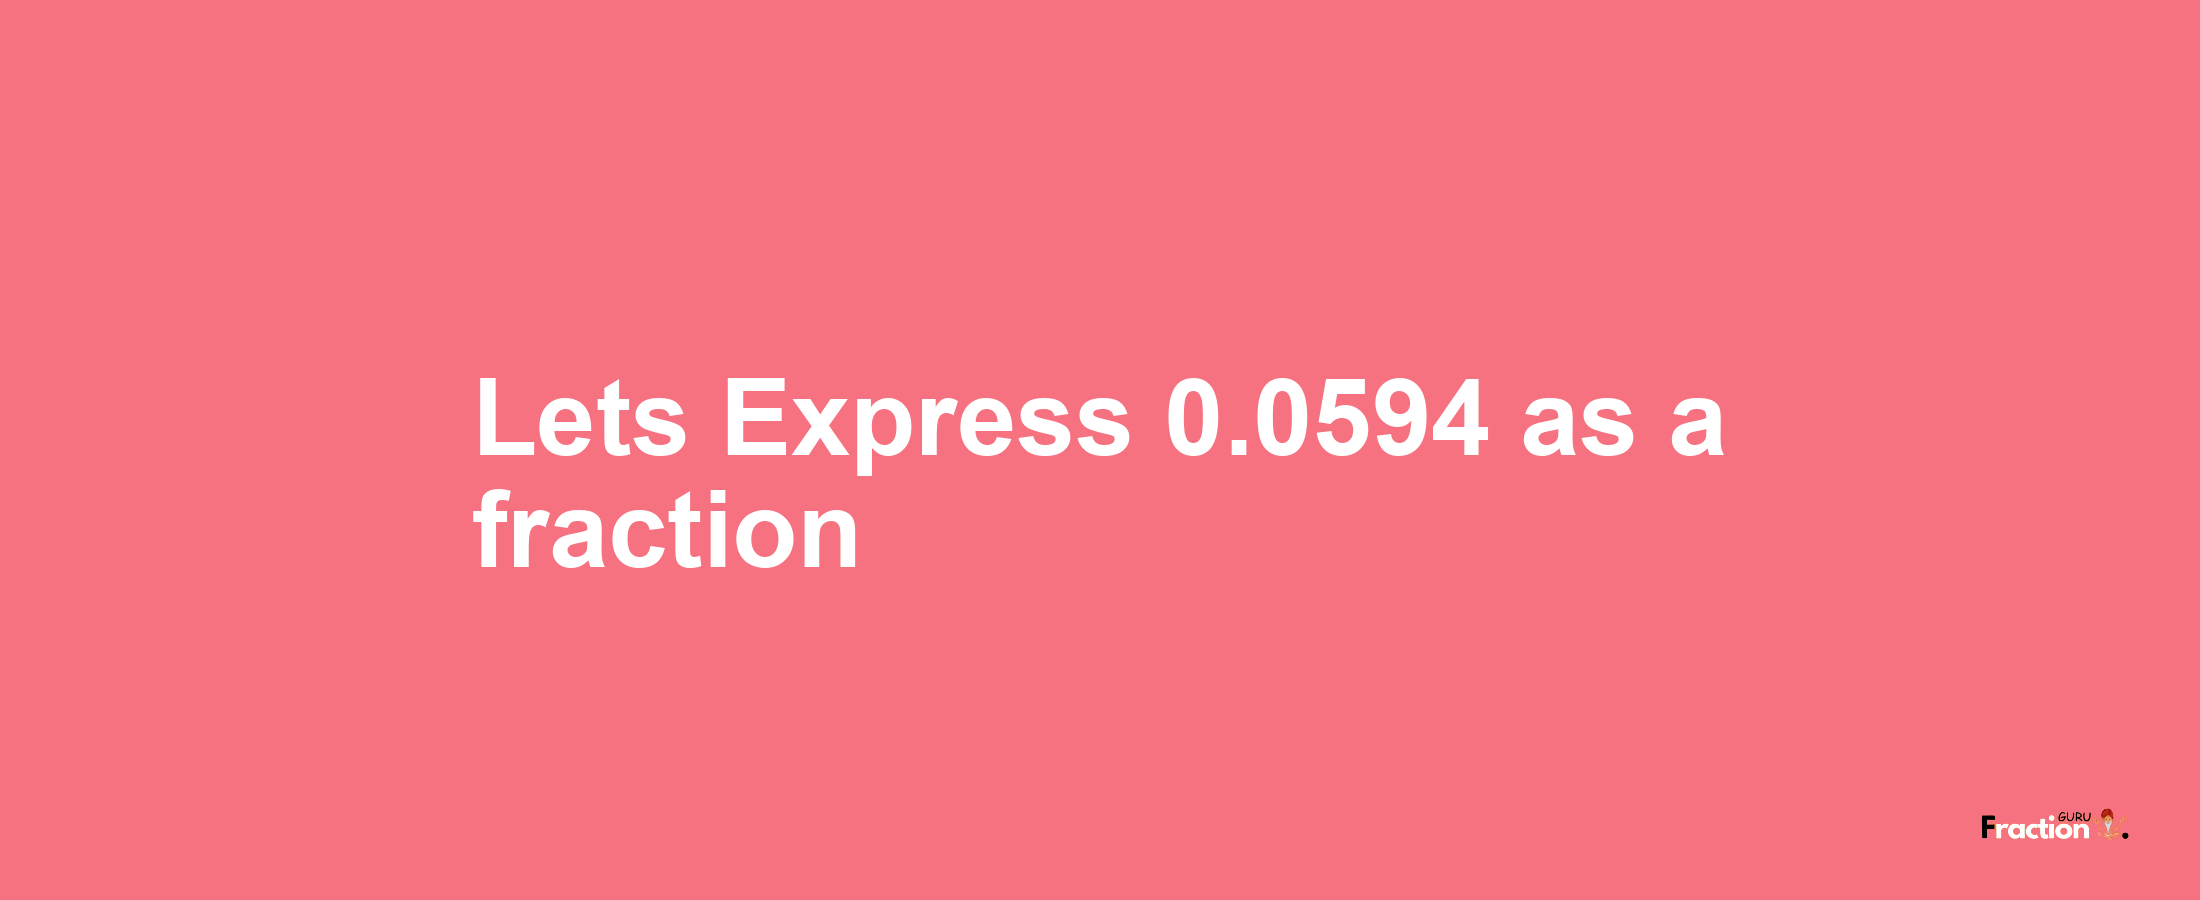 Lets Express 0.0594 as afraction